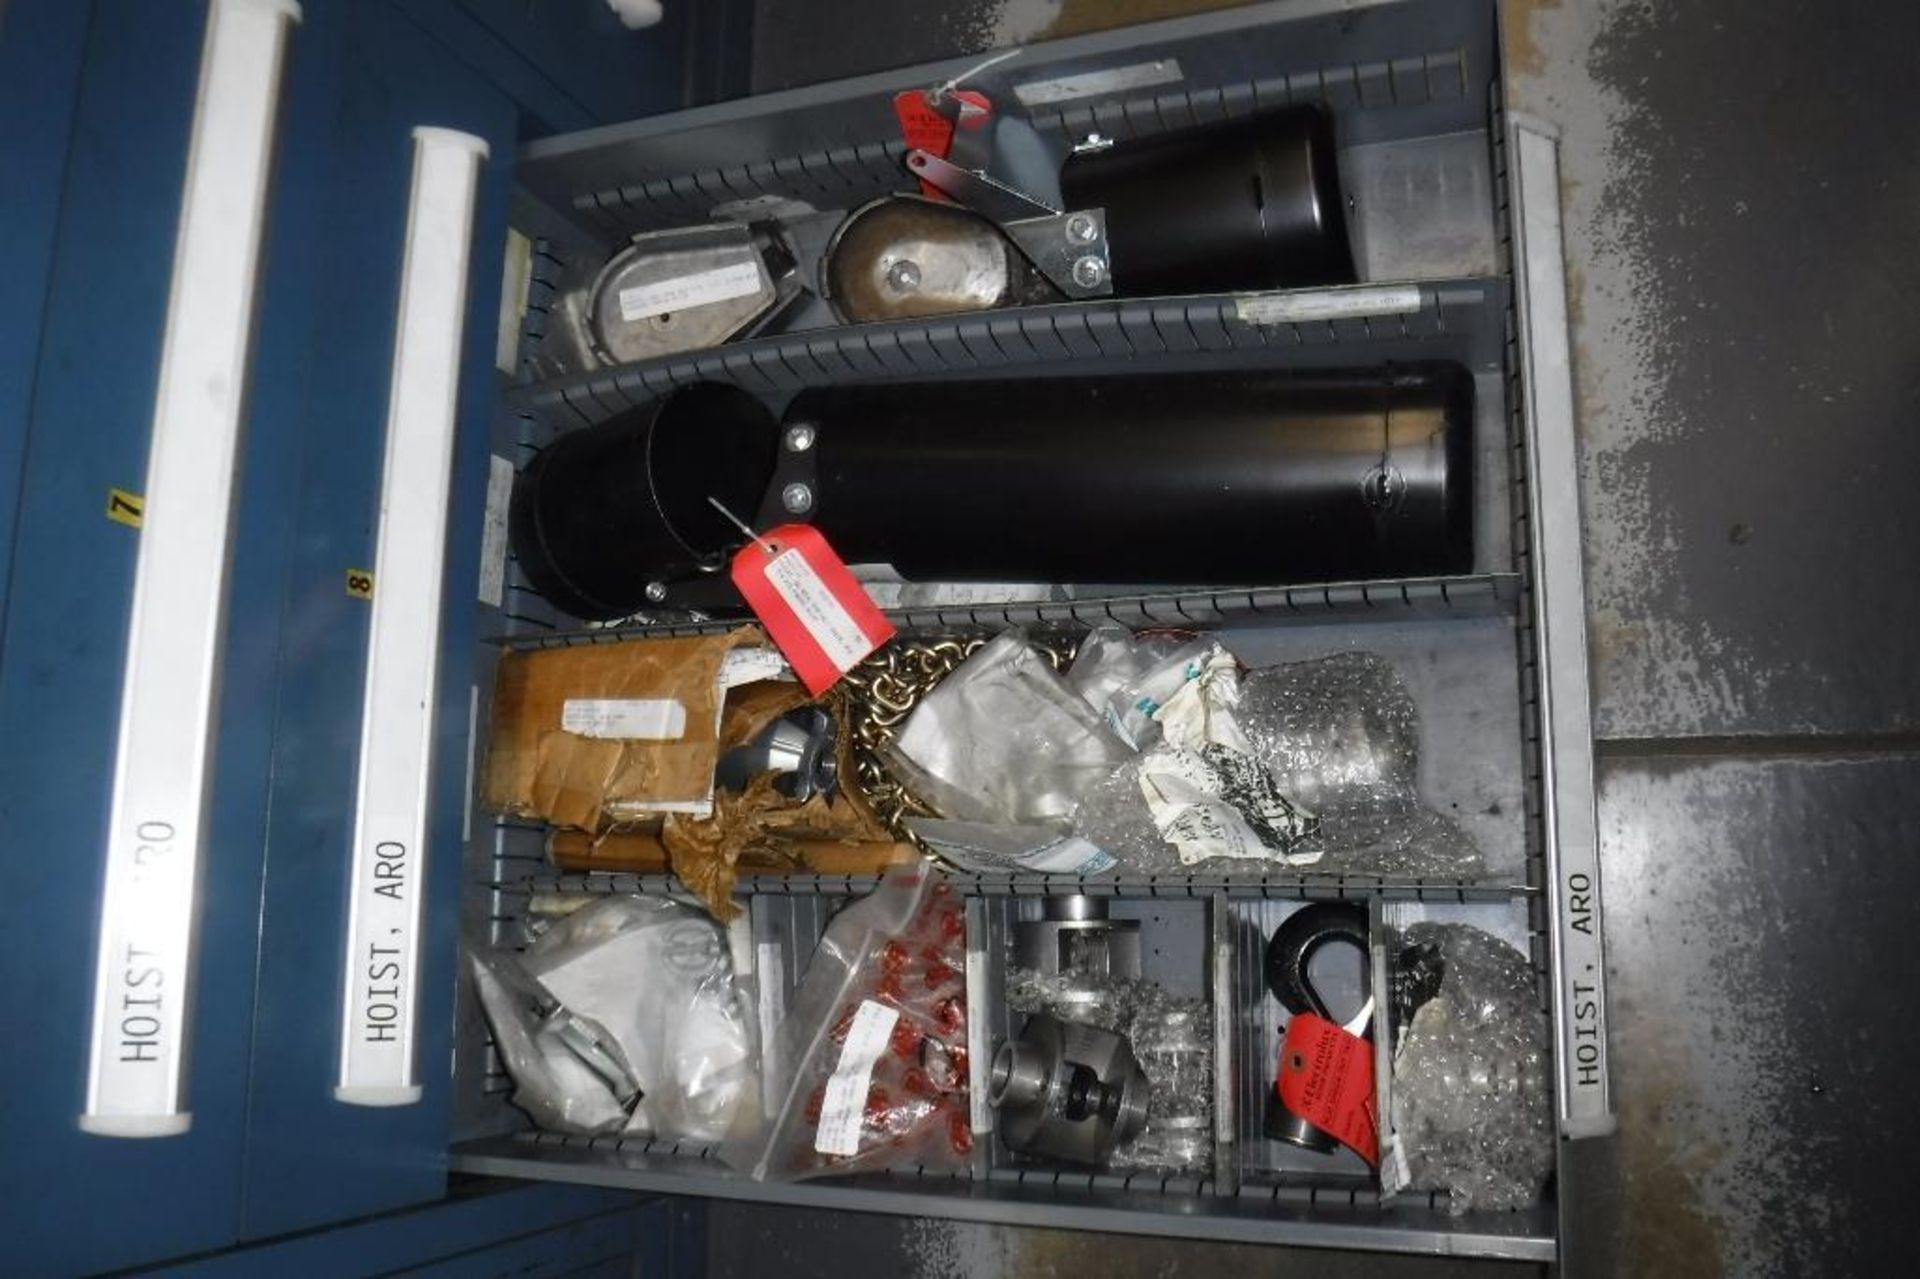 9-Drawer Vidmar Cabinet with Contents-Graco Parts,Hoist Parts,Pump Parts, MUST REMOVE BY 2/14/20-MUS - Image 2 of 12